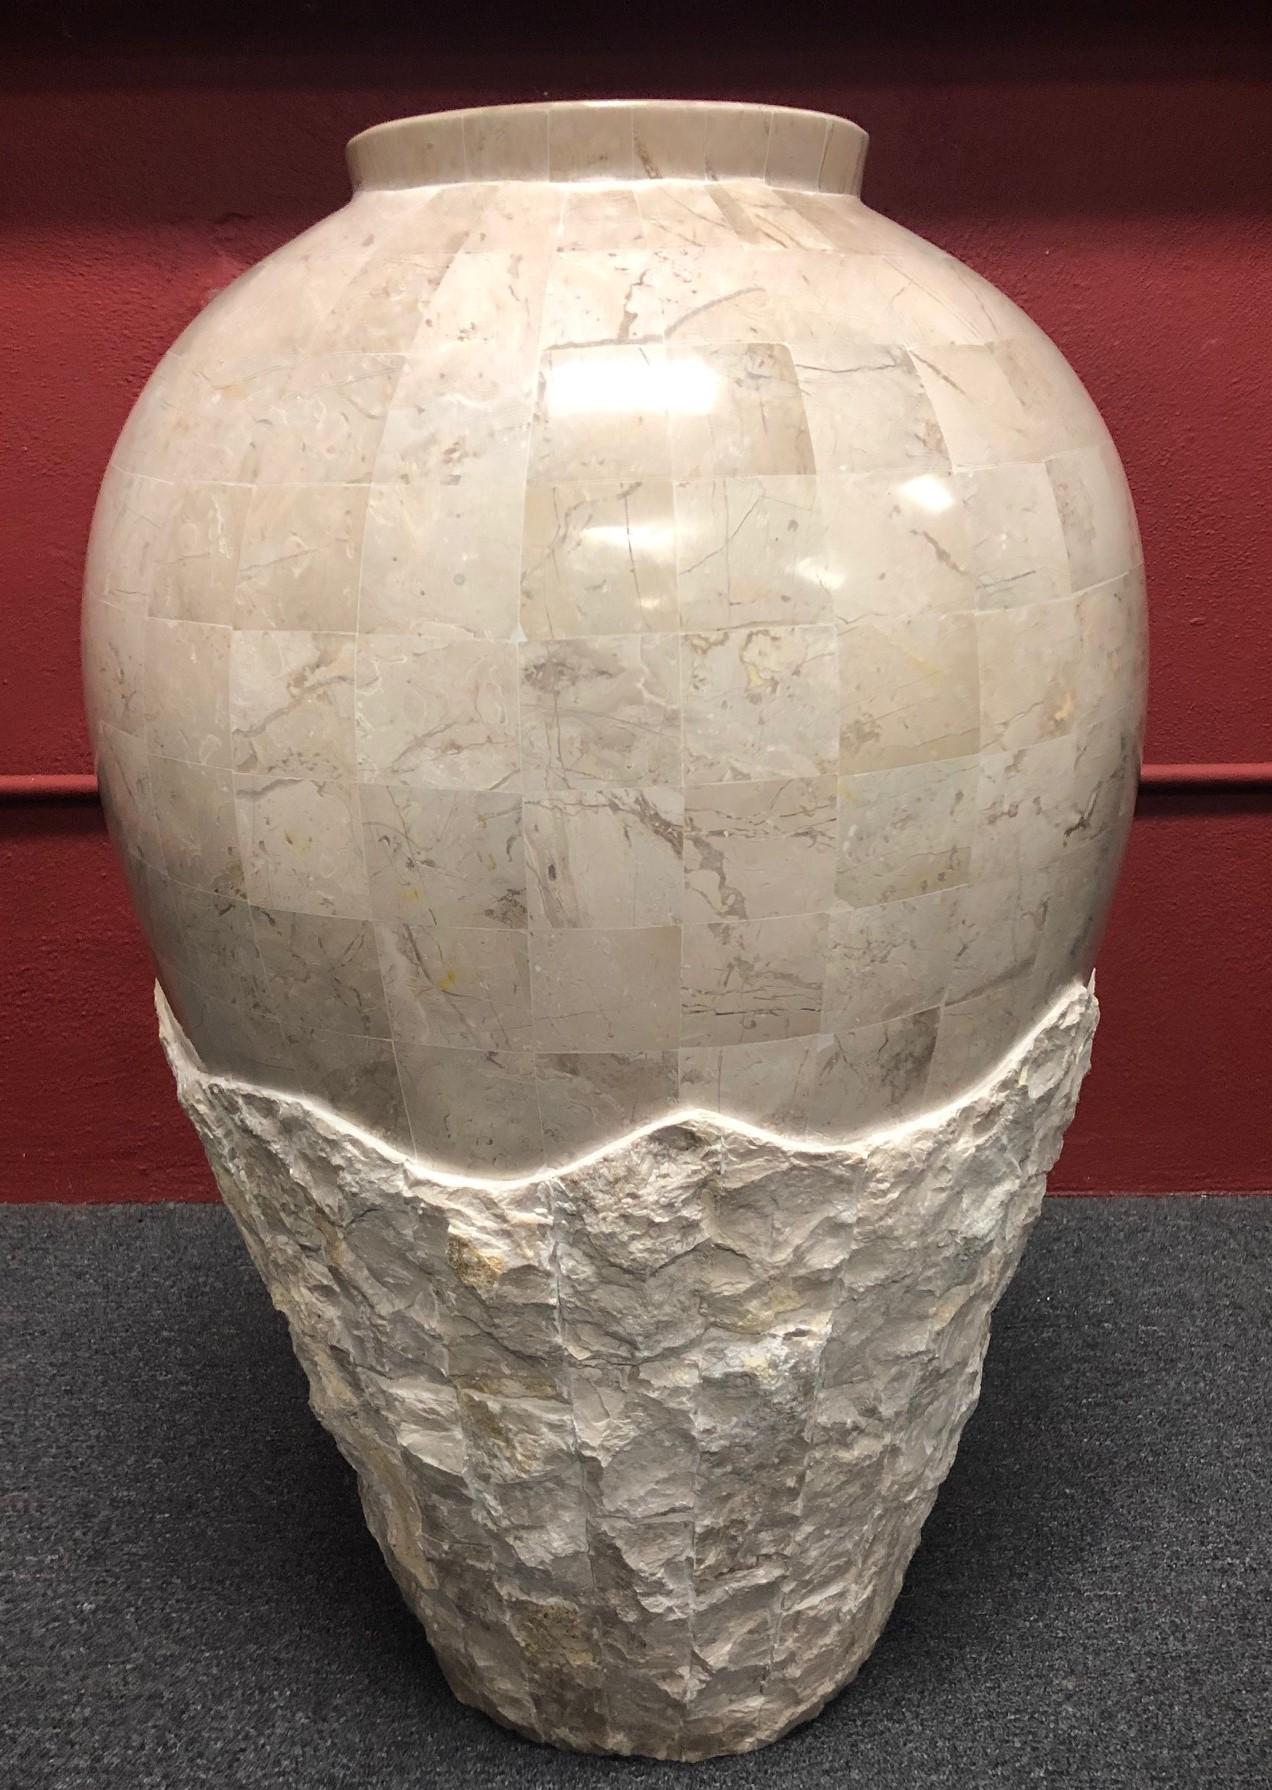 A very nice extra large tessellated stone floor vase / planter / jar by Marquis of Beverly Hills, circa 1990s. The bottom portion of the piece has a rugged stone exterior that melds into the smooth, polished top portion.
 